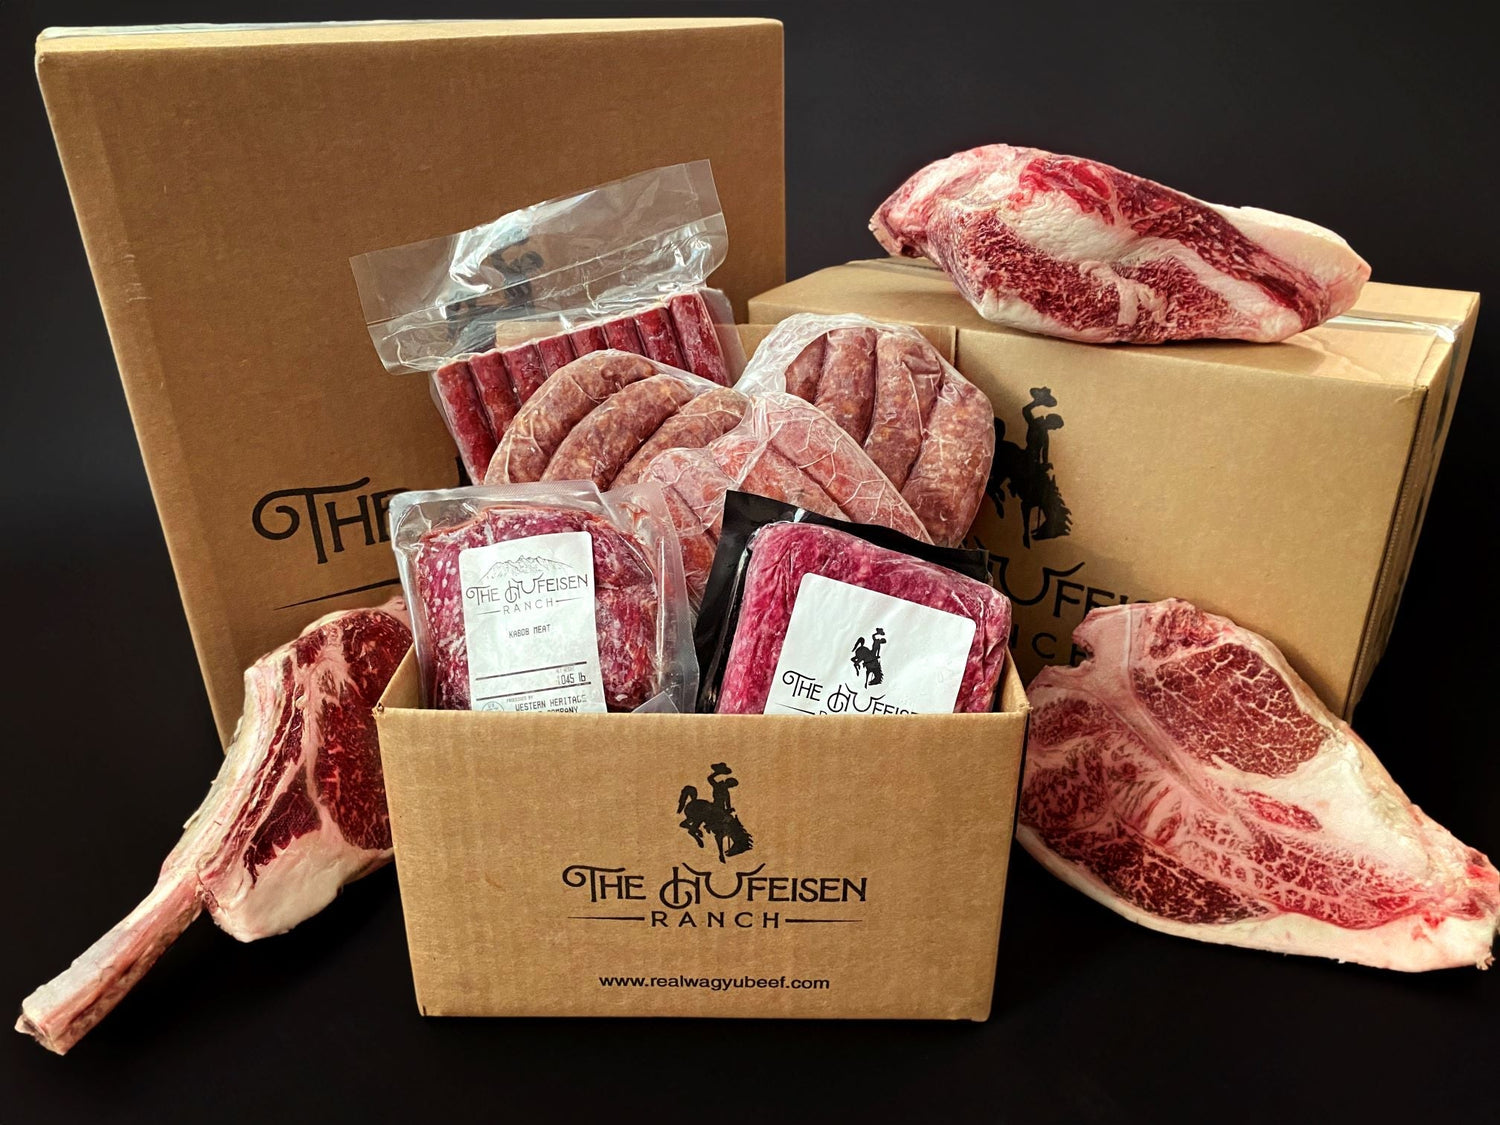 All-Natural Grass-Fed Meat Bundles & Artisan Meat Box Club - The Hufeisen-Ranch (WYO Wagyu)